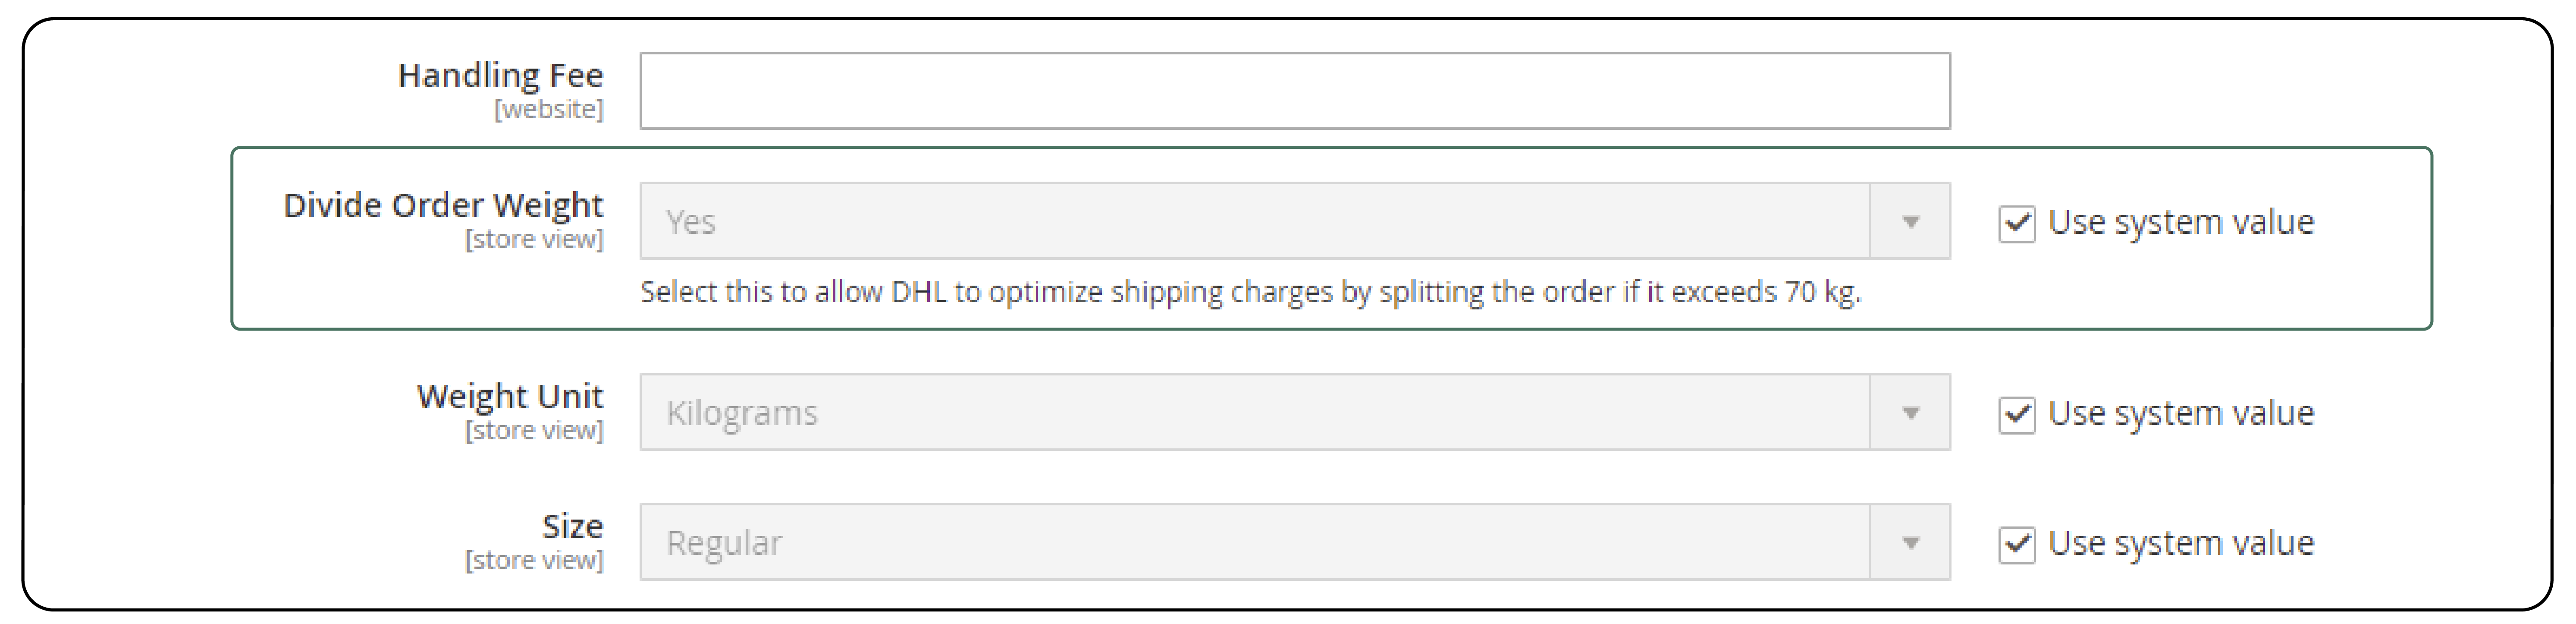 Image shows Setting Up DHL Shipping in Magento 2-Step 8